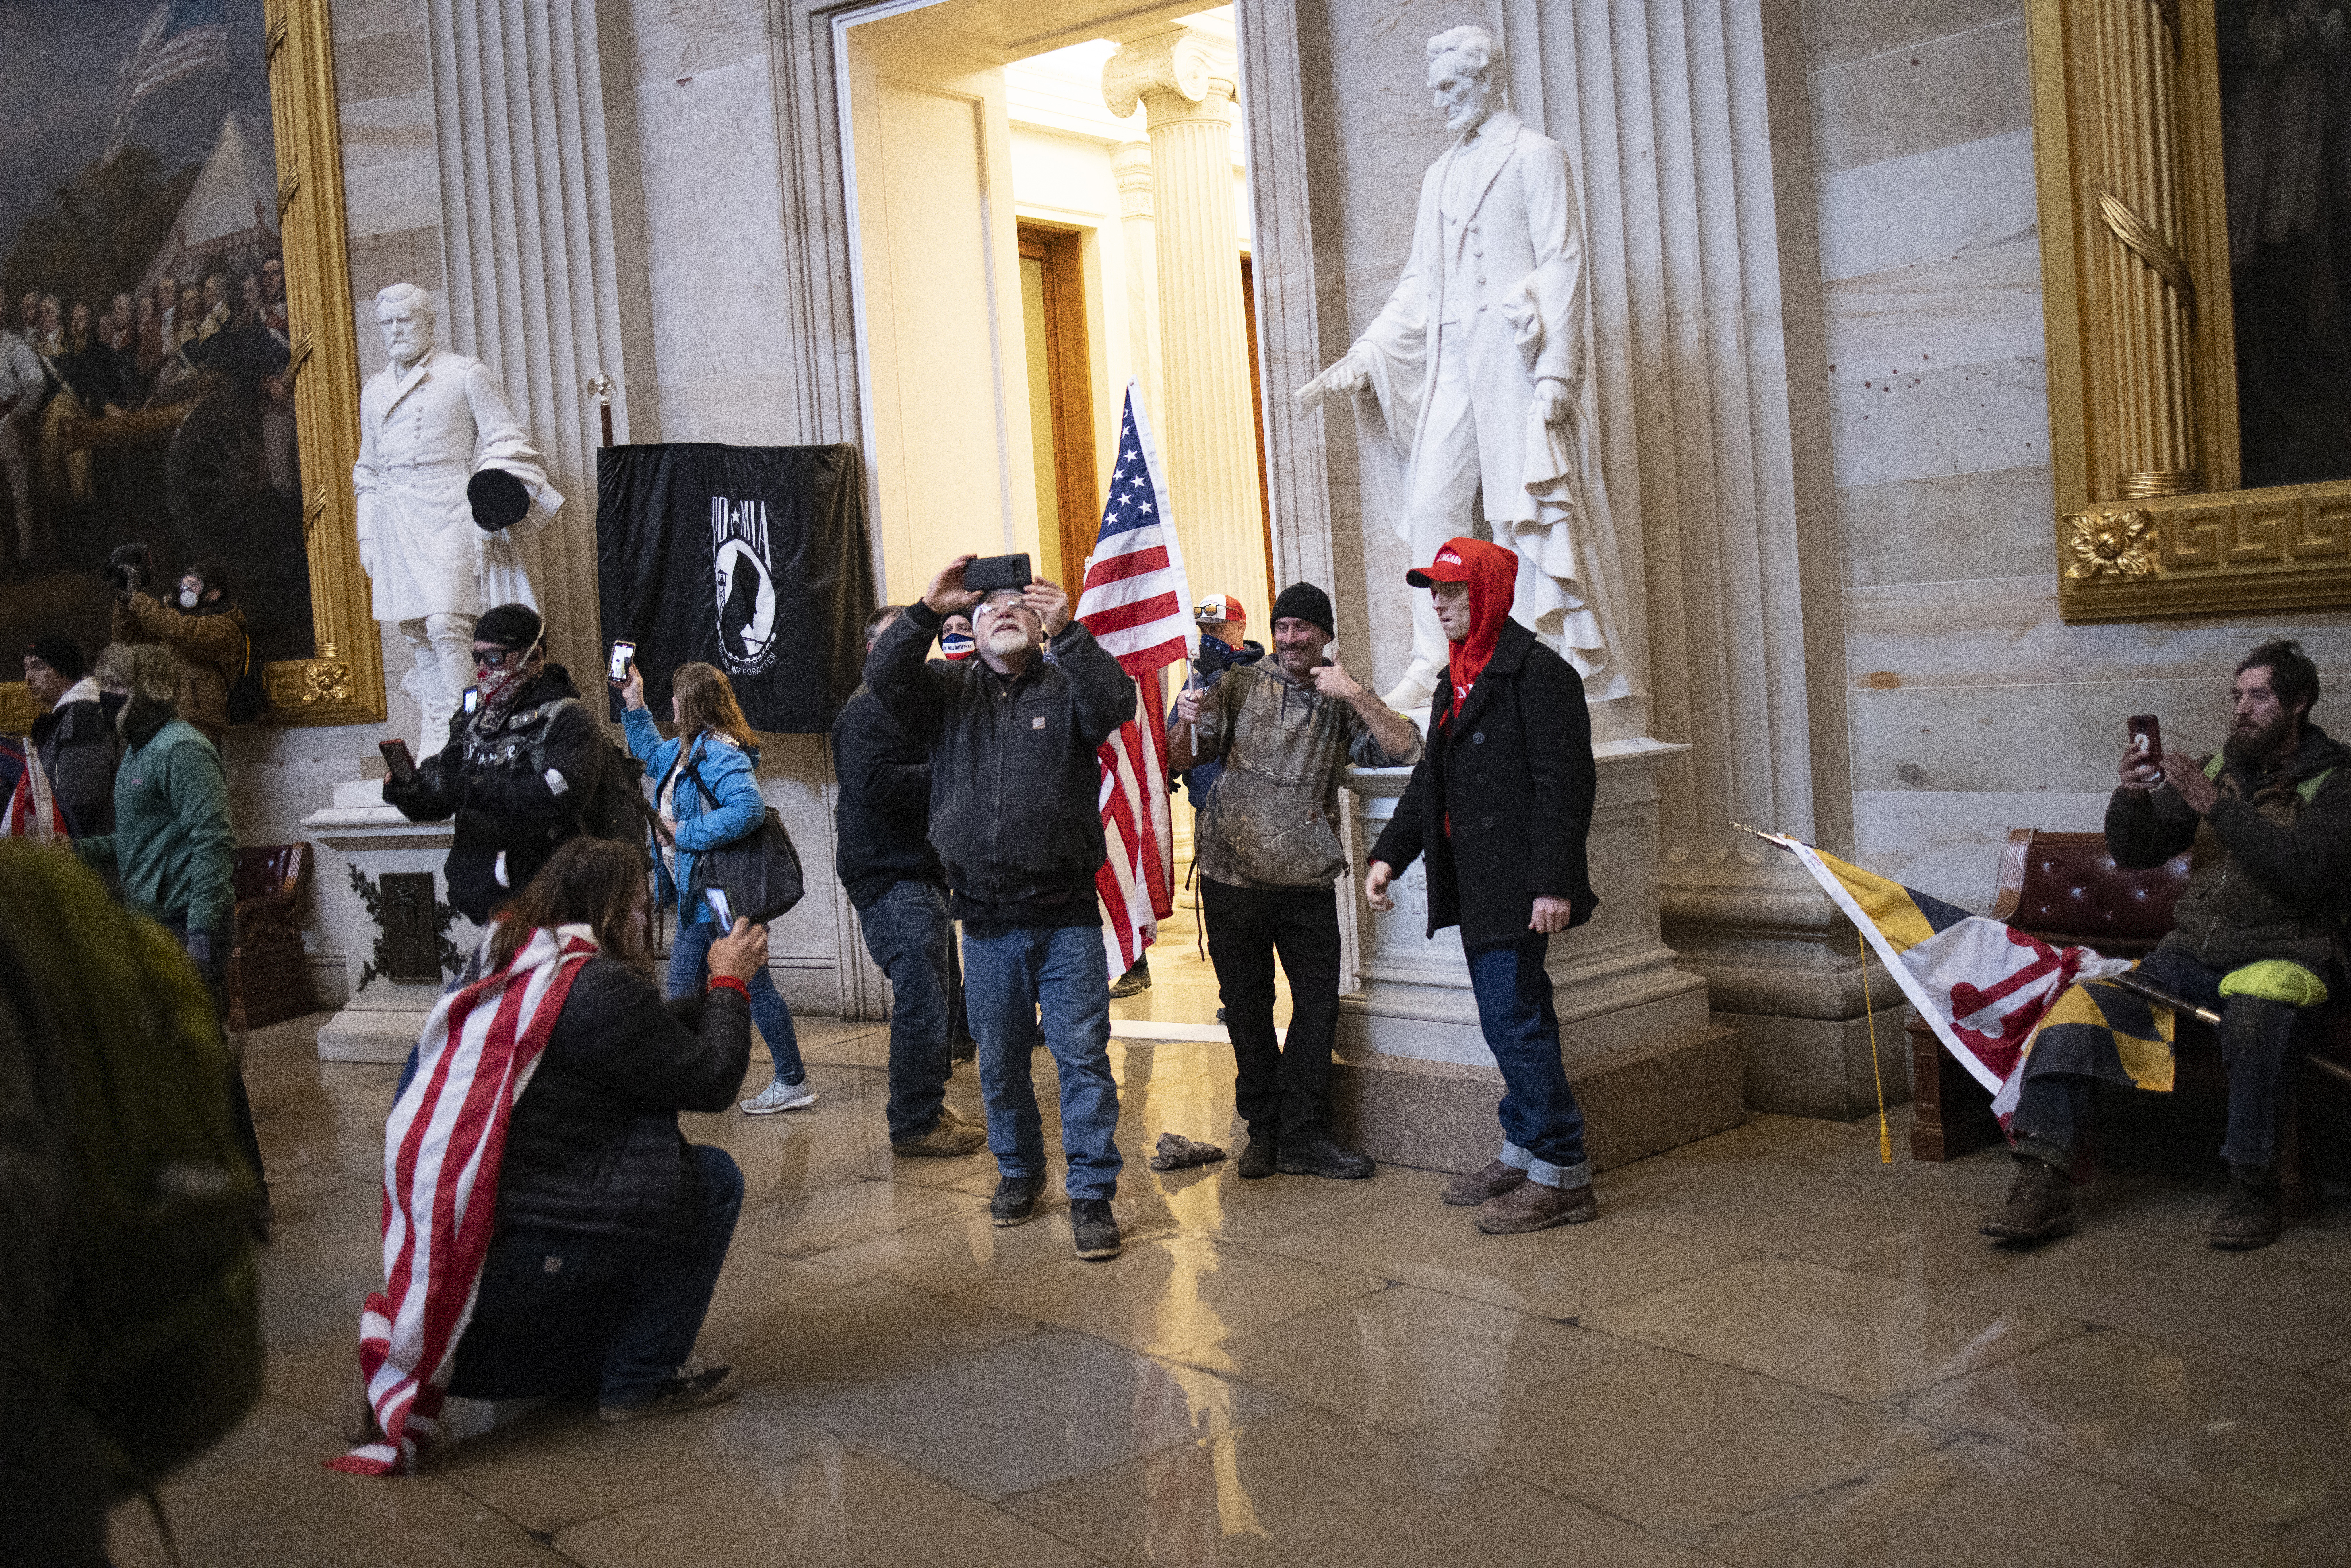 WASHINGTON, DC - JANUARY 06: Protesters supporting U.S. President Donald Trump gather gather in the Rotunda of the U.S. Capitol after groups breached the building's security on January 06, 2021 in Washington, DC. Pro-Trump protesters entered the U.S. Capitol building during demonstrations in the nation's capital. (Photo by Win McNamee/Getty Images)